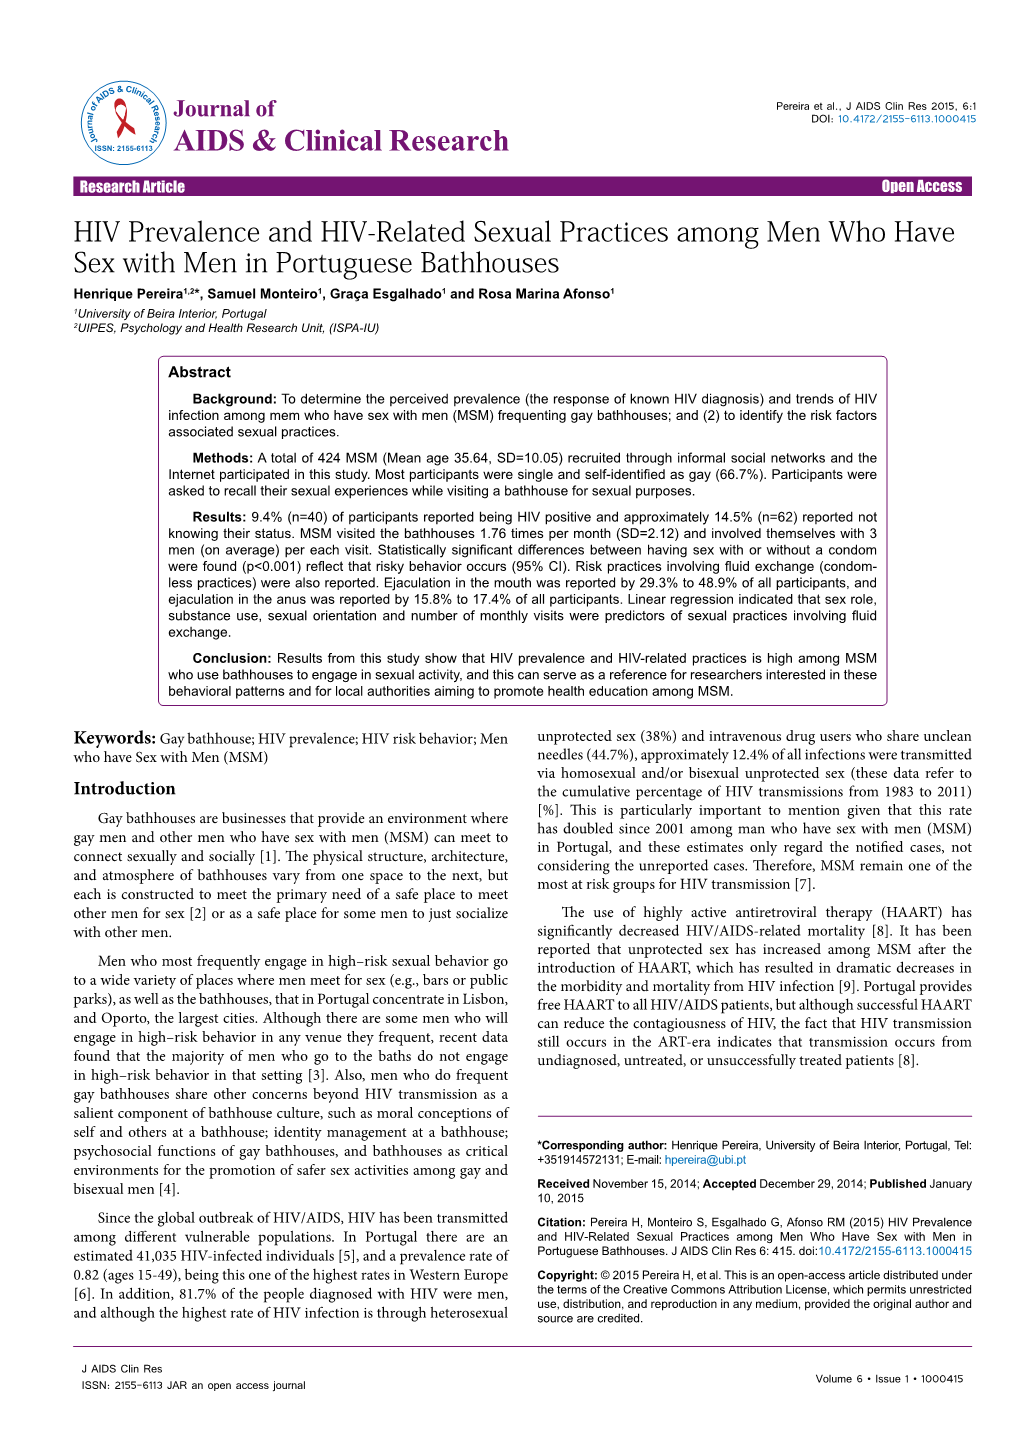 HIV Prevalence and HIV-Related Sexual Practices Among Men Who